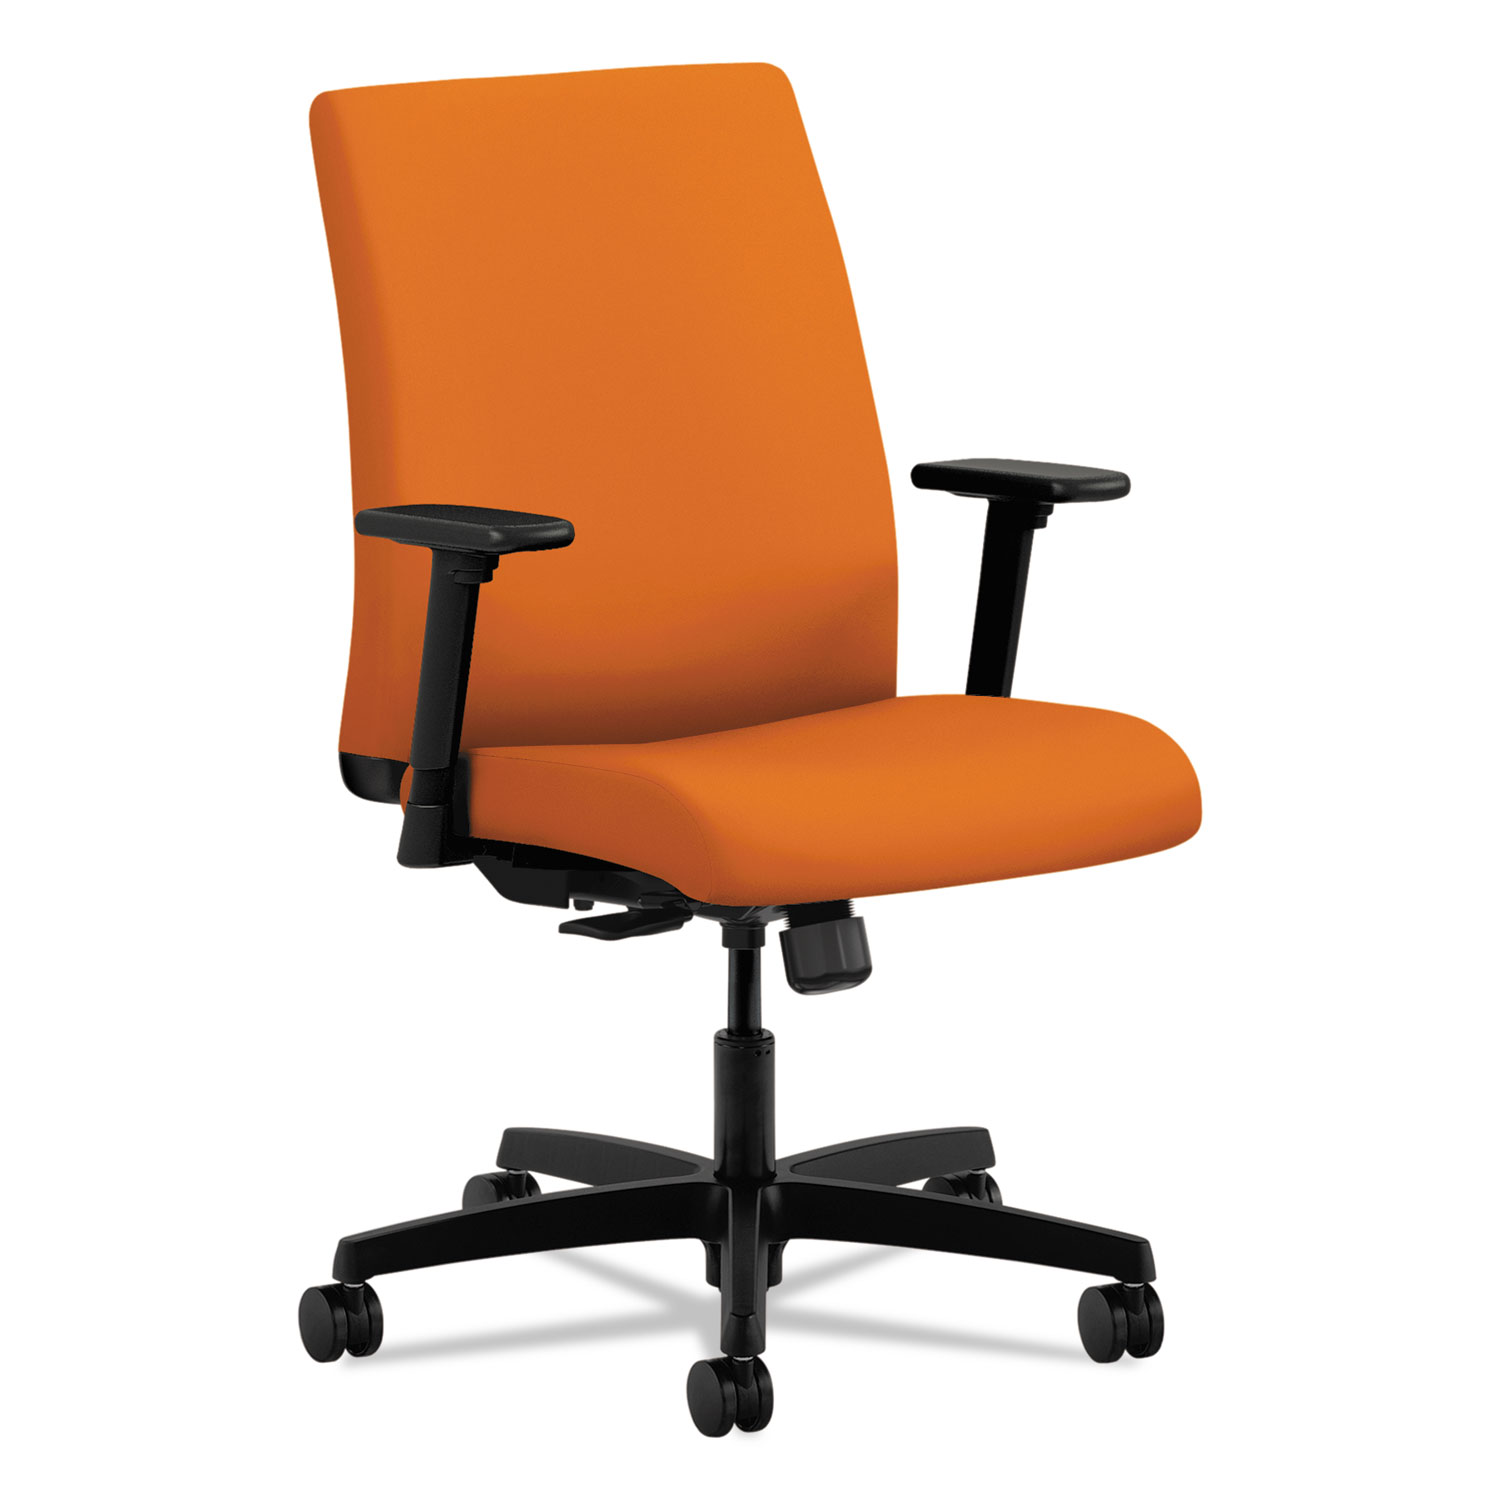  HON HITL1.A.H.U.CU47.T.SB Ignition Series Fabric Low-Back Task Chair, Supports up to 300 lbs., Apricot Seat/Apricot Back, Black Base (HONIT105CU47) 